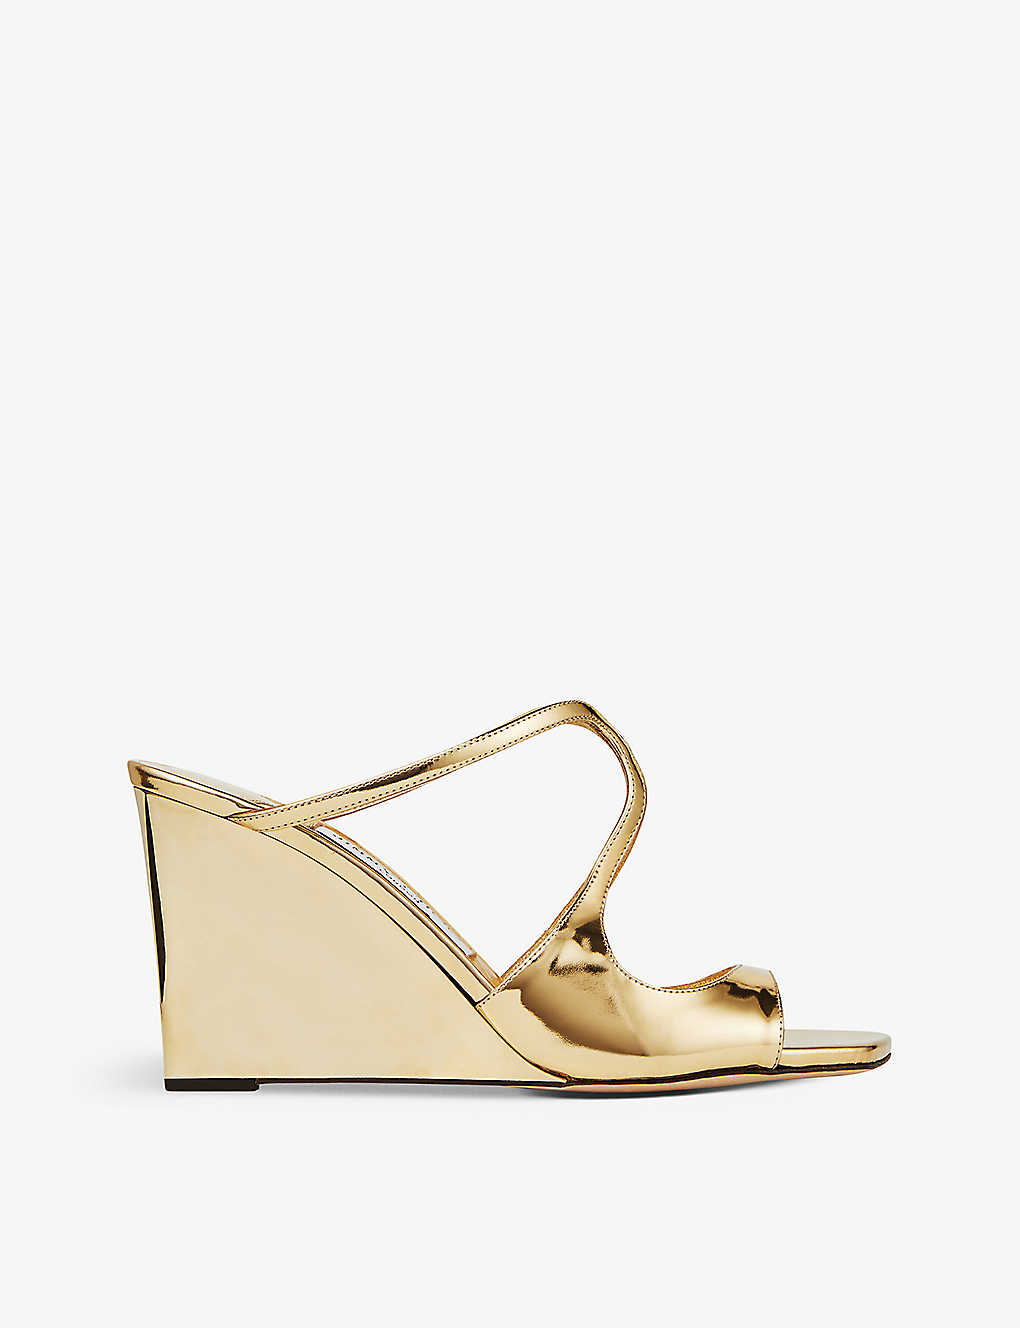 Shop Jimmy Choo Women's Gold Anise 85 Patent-leather Wedge Sandals